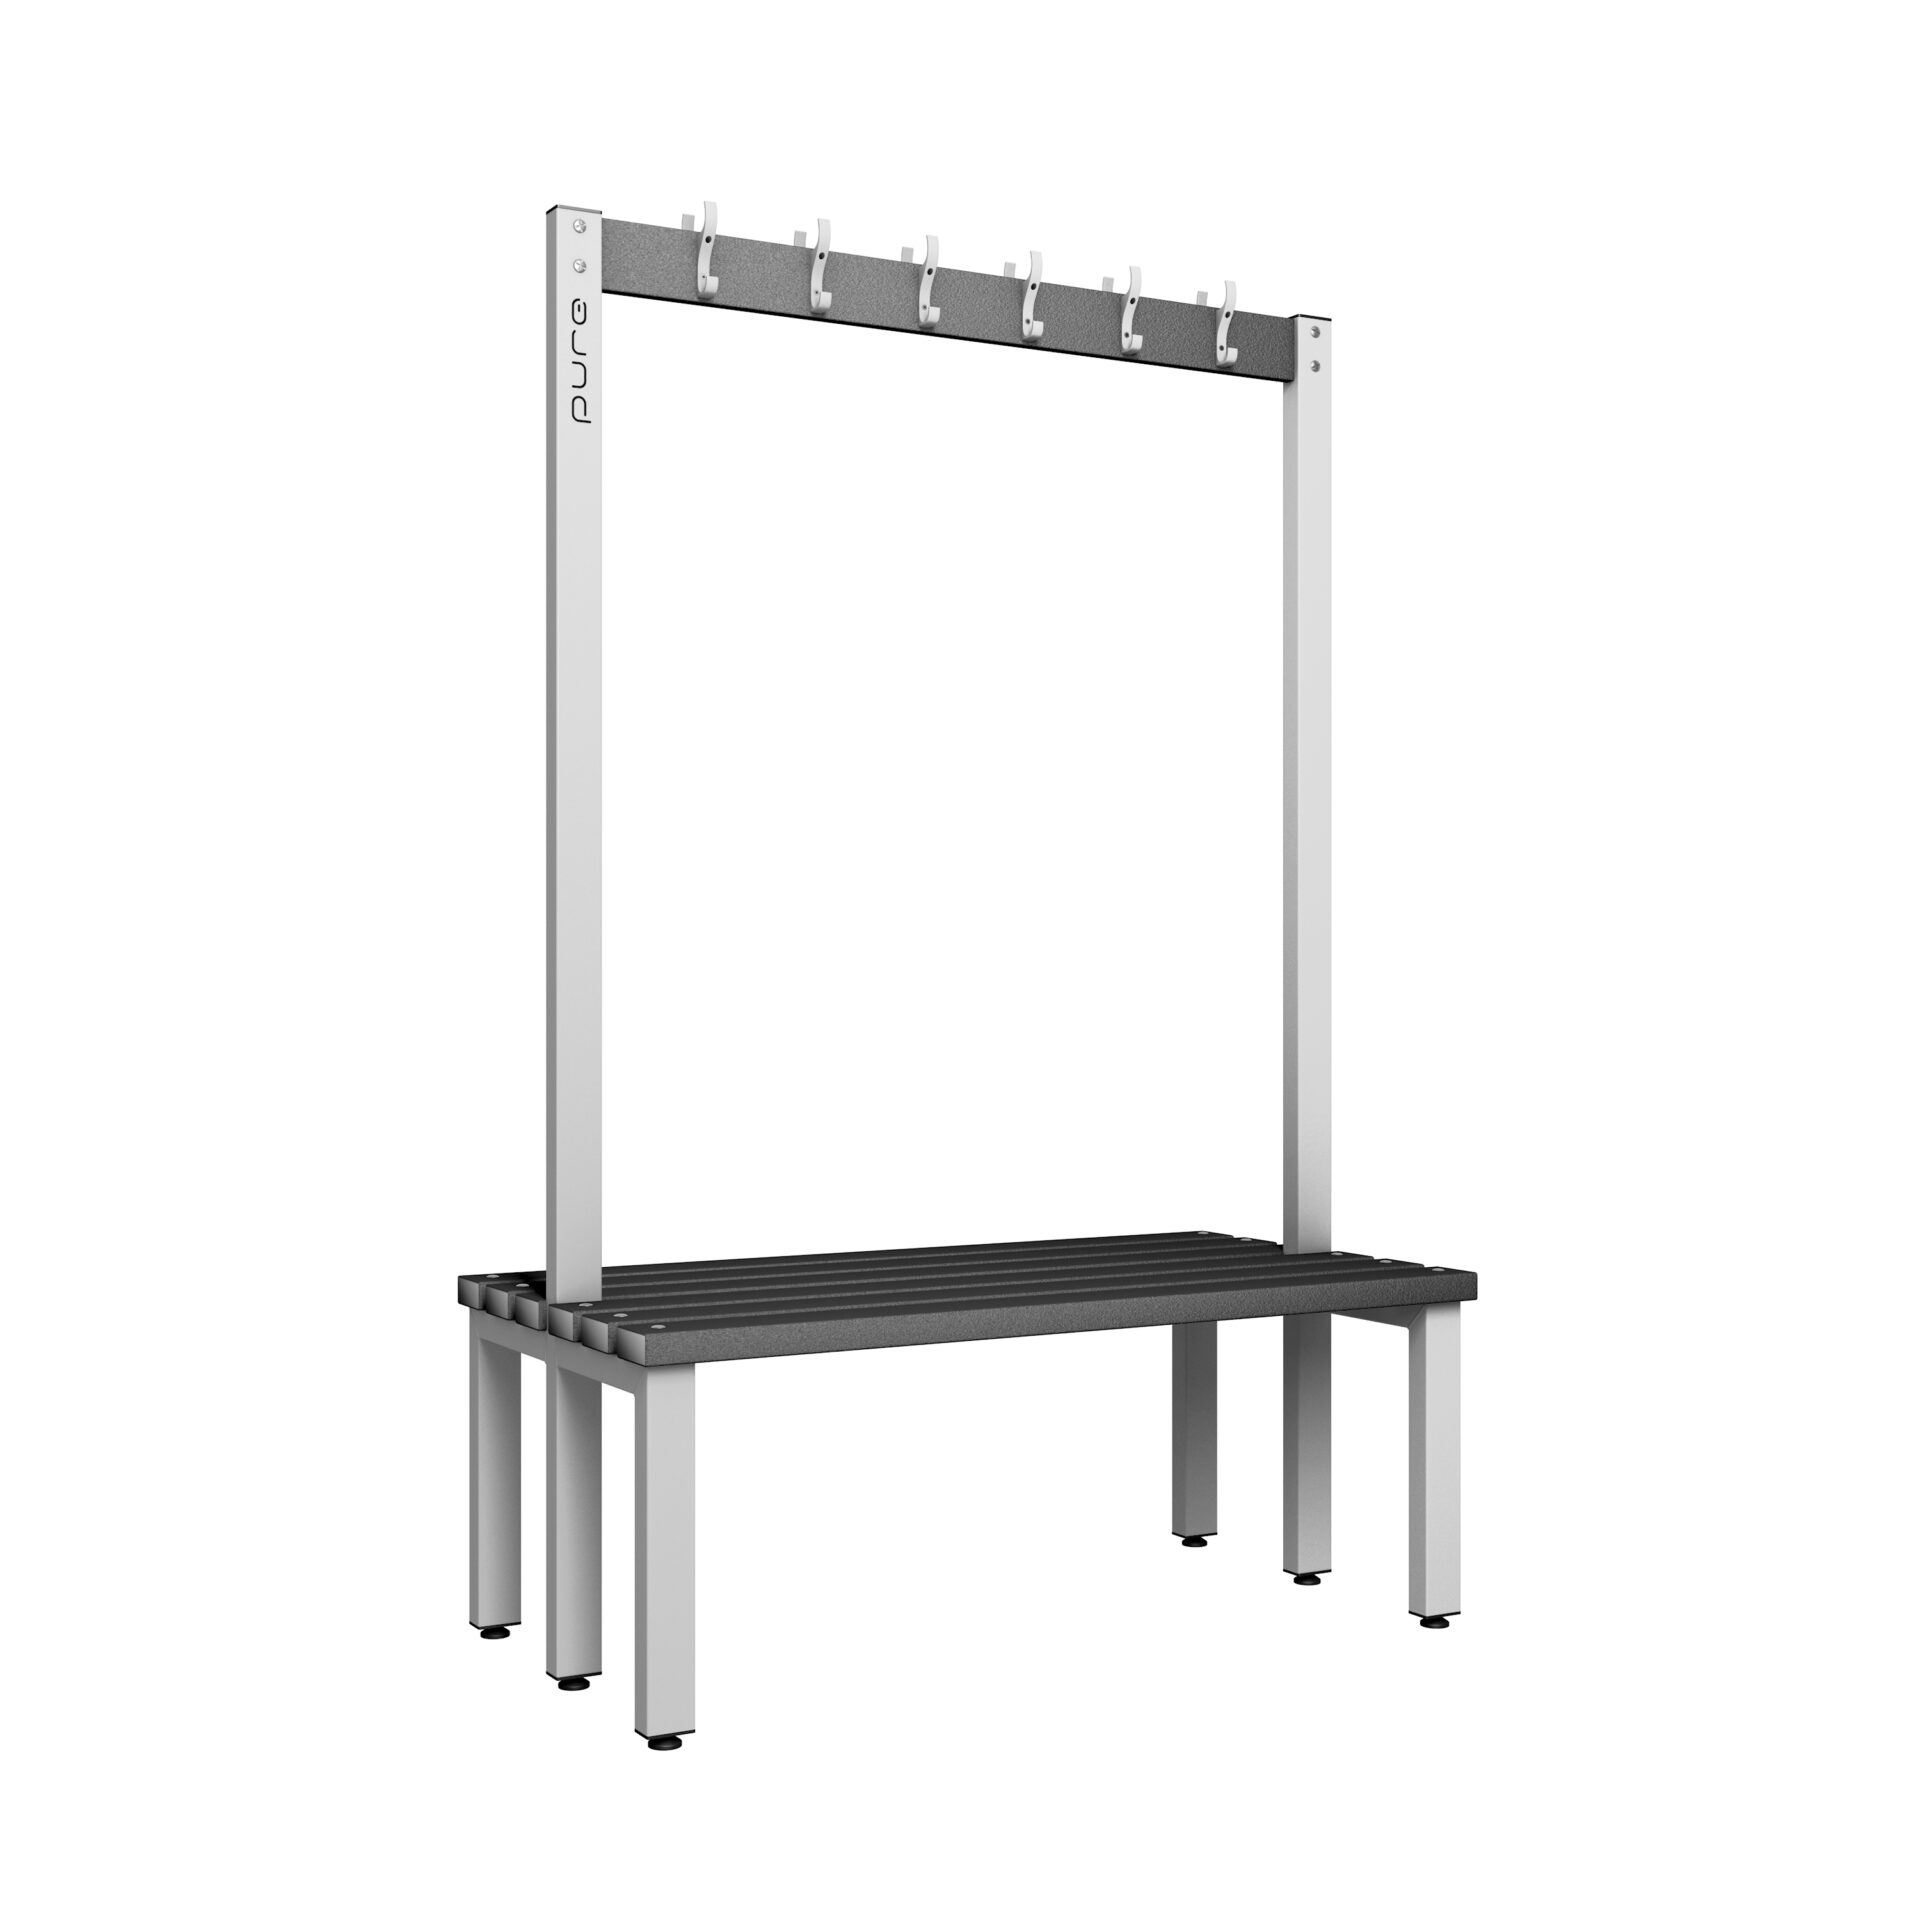 Pure Carbon Zero Double Sided 1200mm 12 Hook Bench - Pearl Silver / Black Polymer